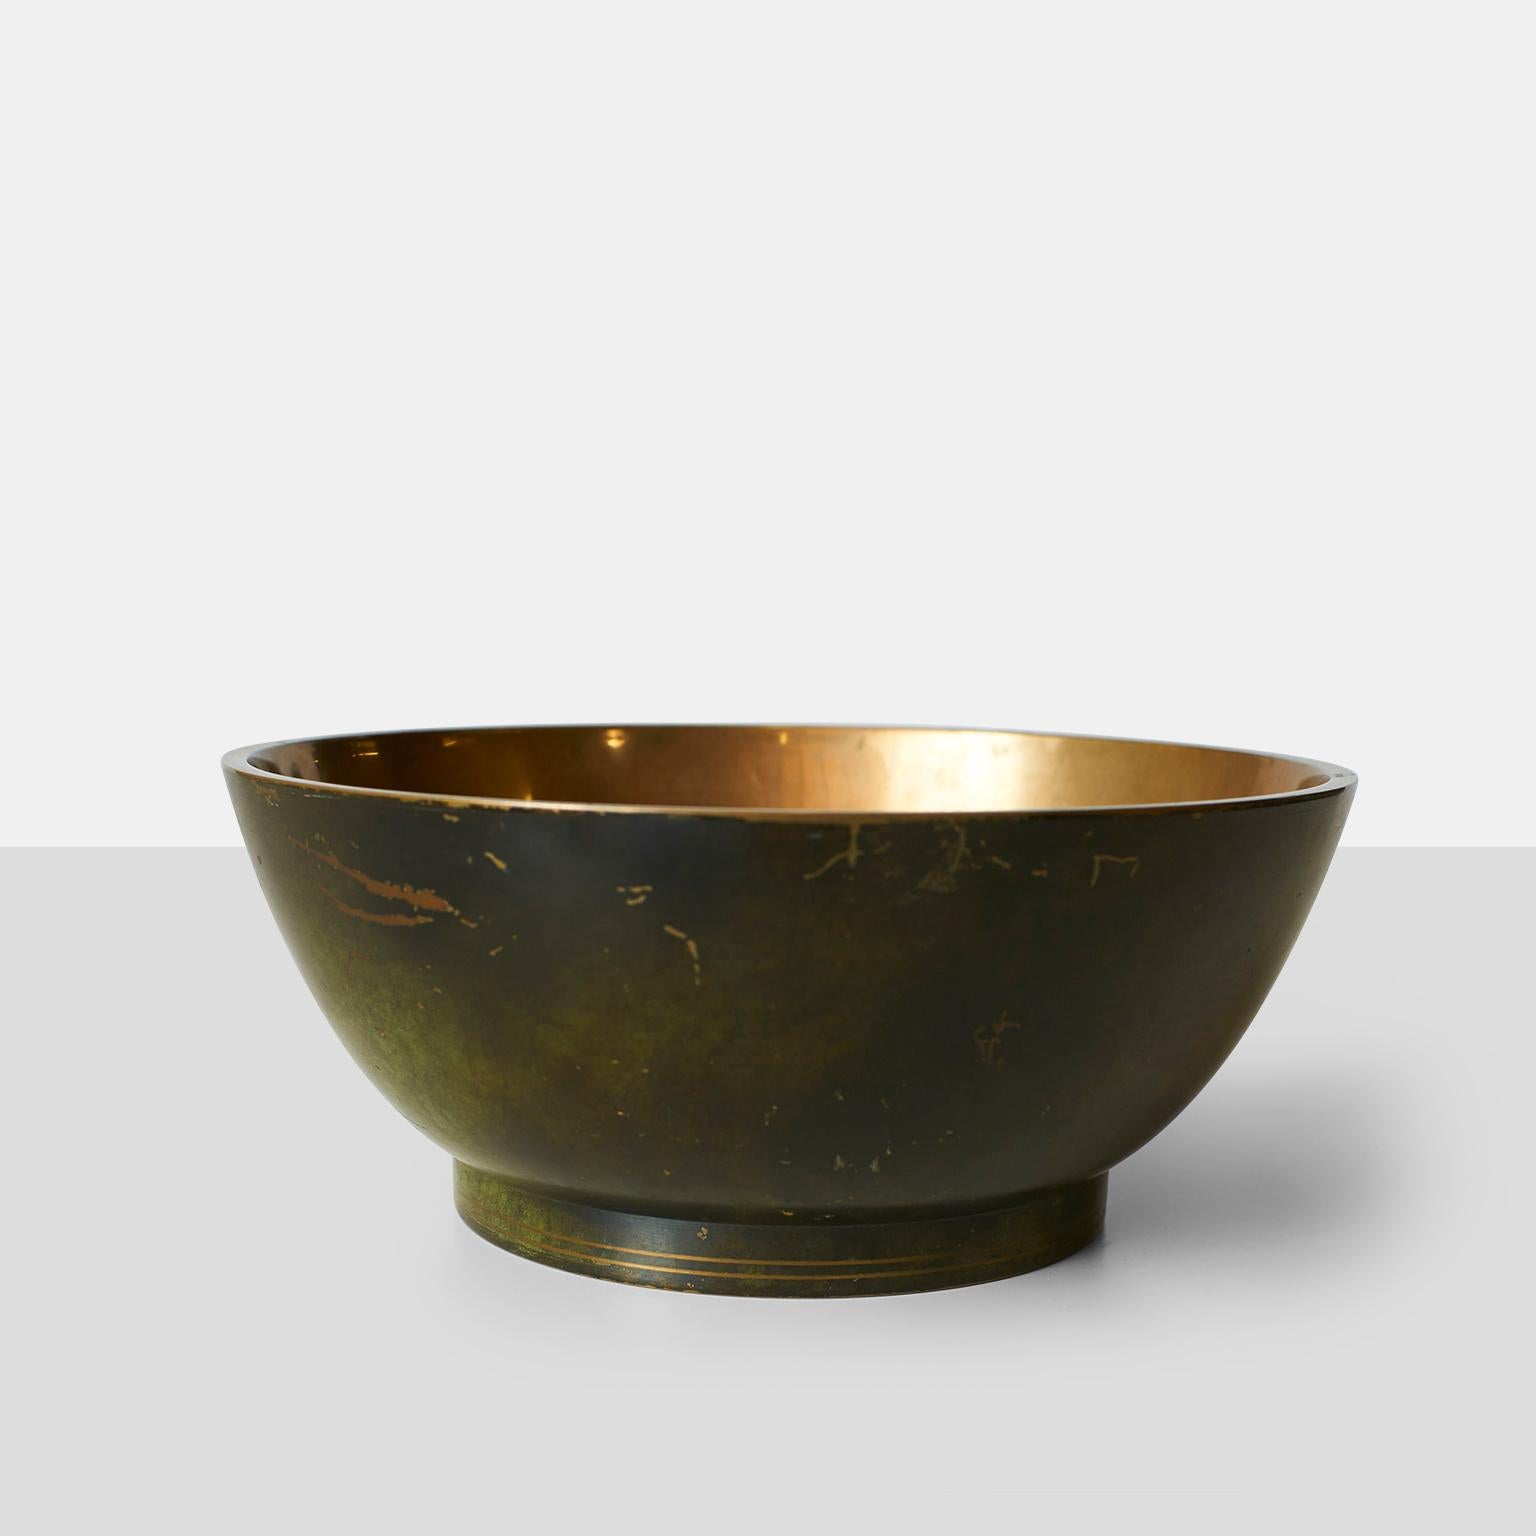 A patinated bronze bowl with highly polished interior. The rim of the foot has a relief pattern of concentric stripes. Designed and manufactured by Krone Bronce in Denmark. Stamped with the makers mark on the base.